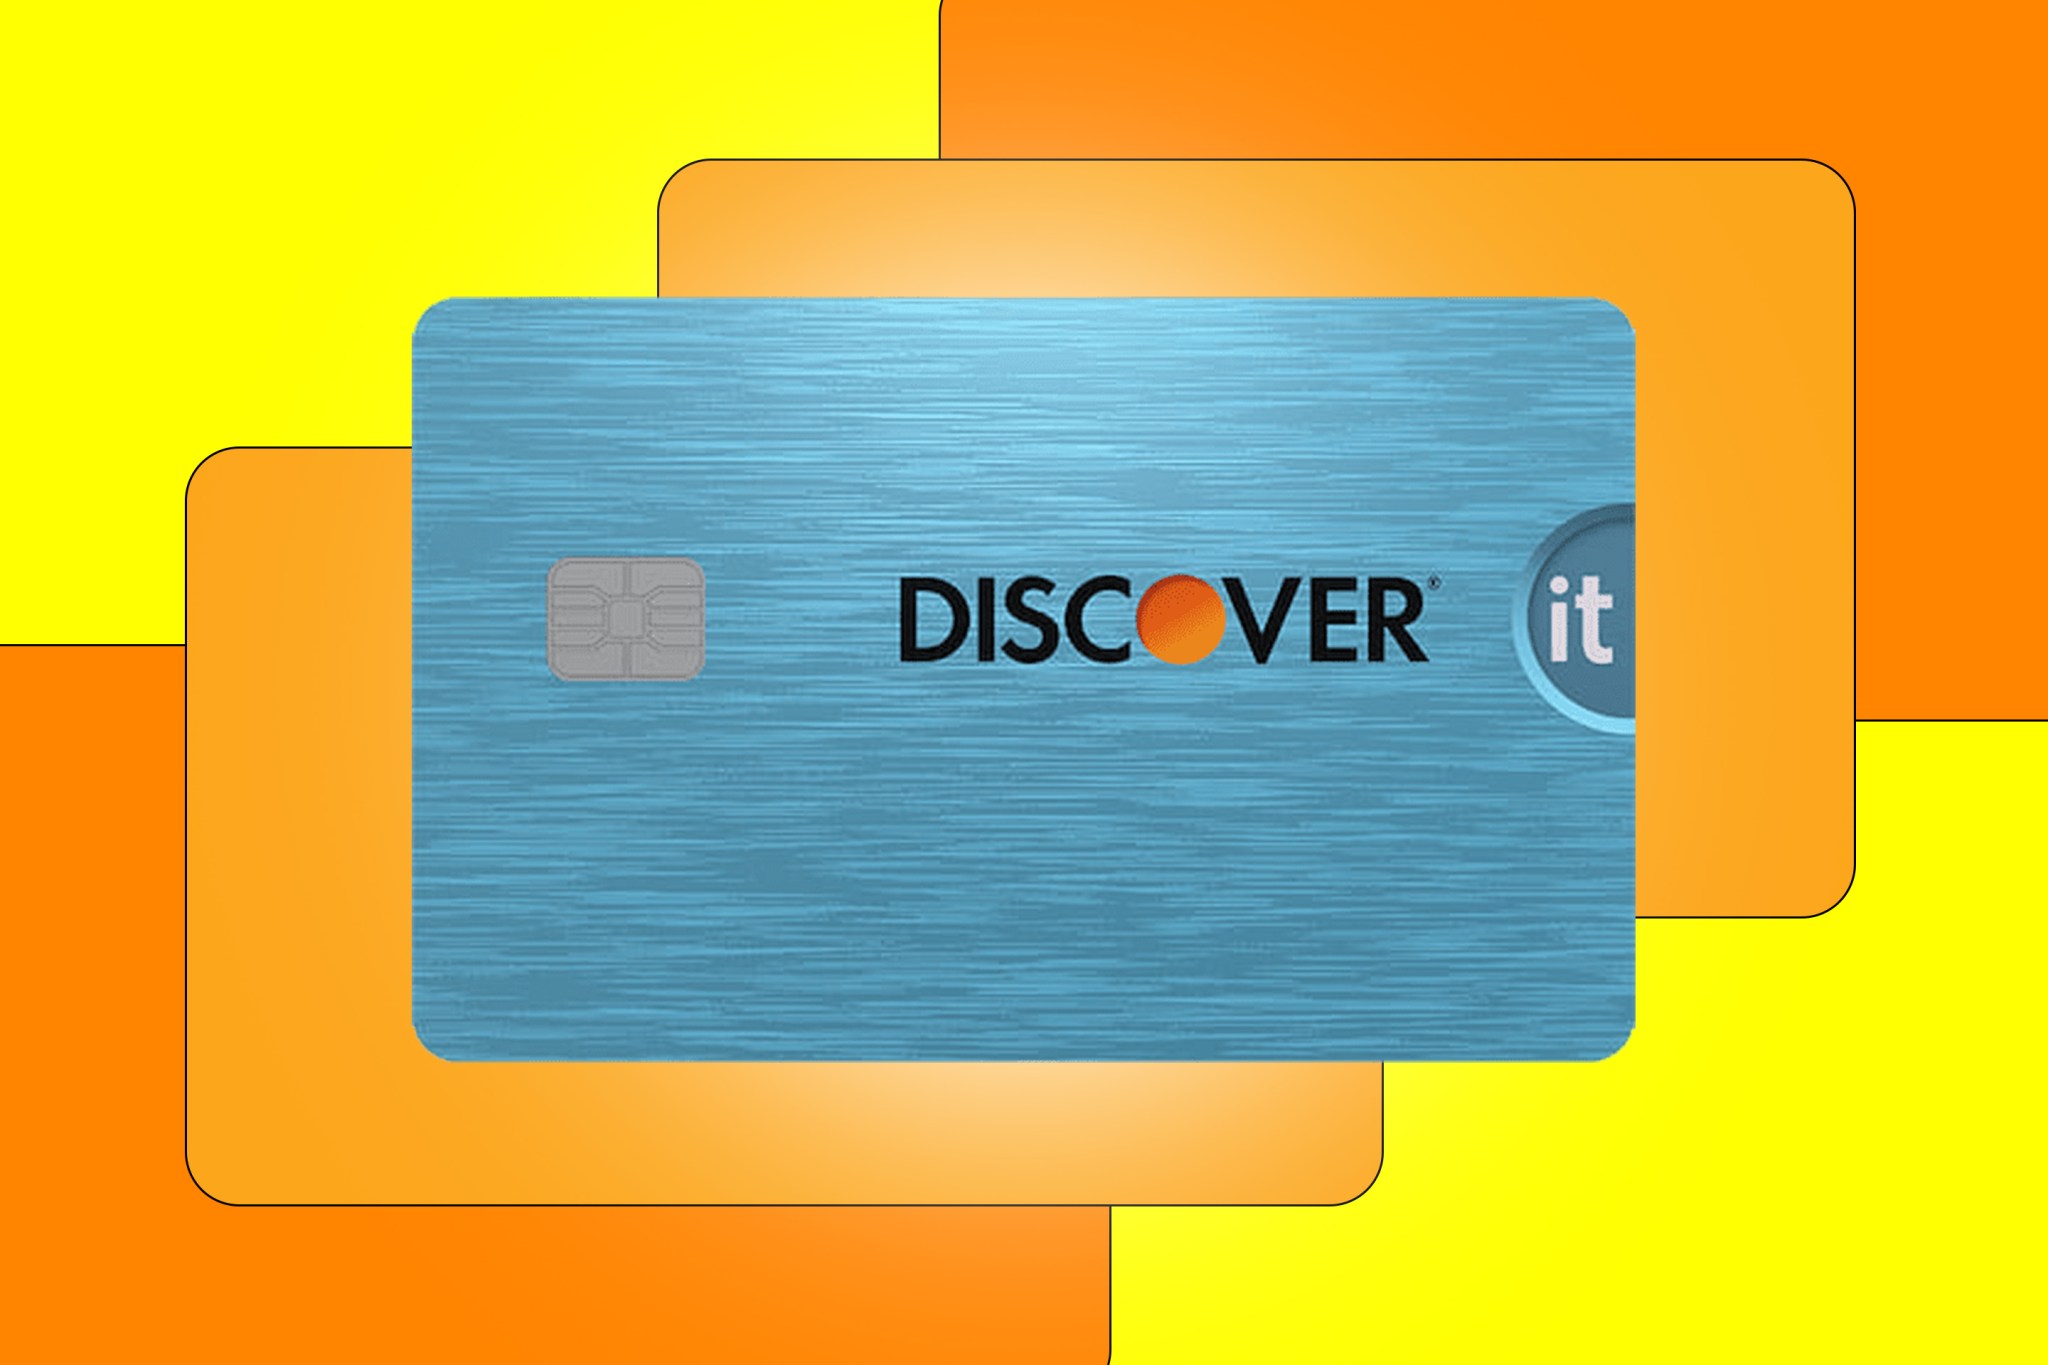 Discover it Cash Back Credit Card review: a no-frills card with rotating categories